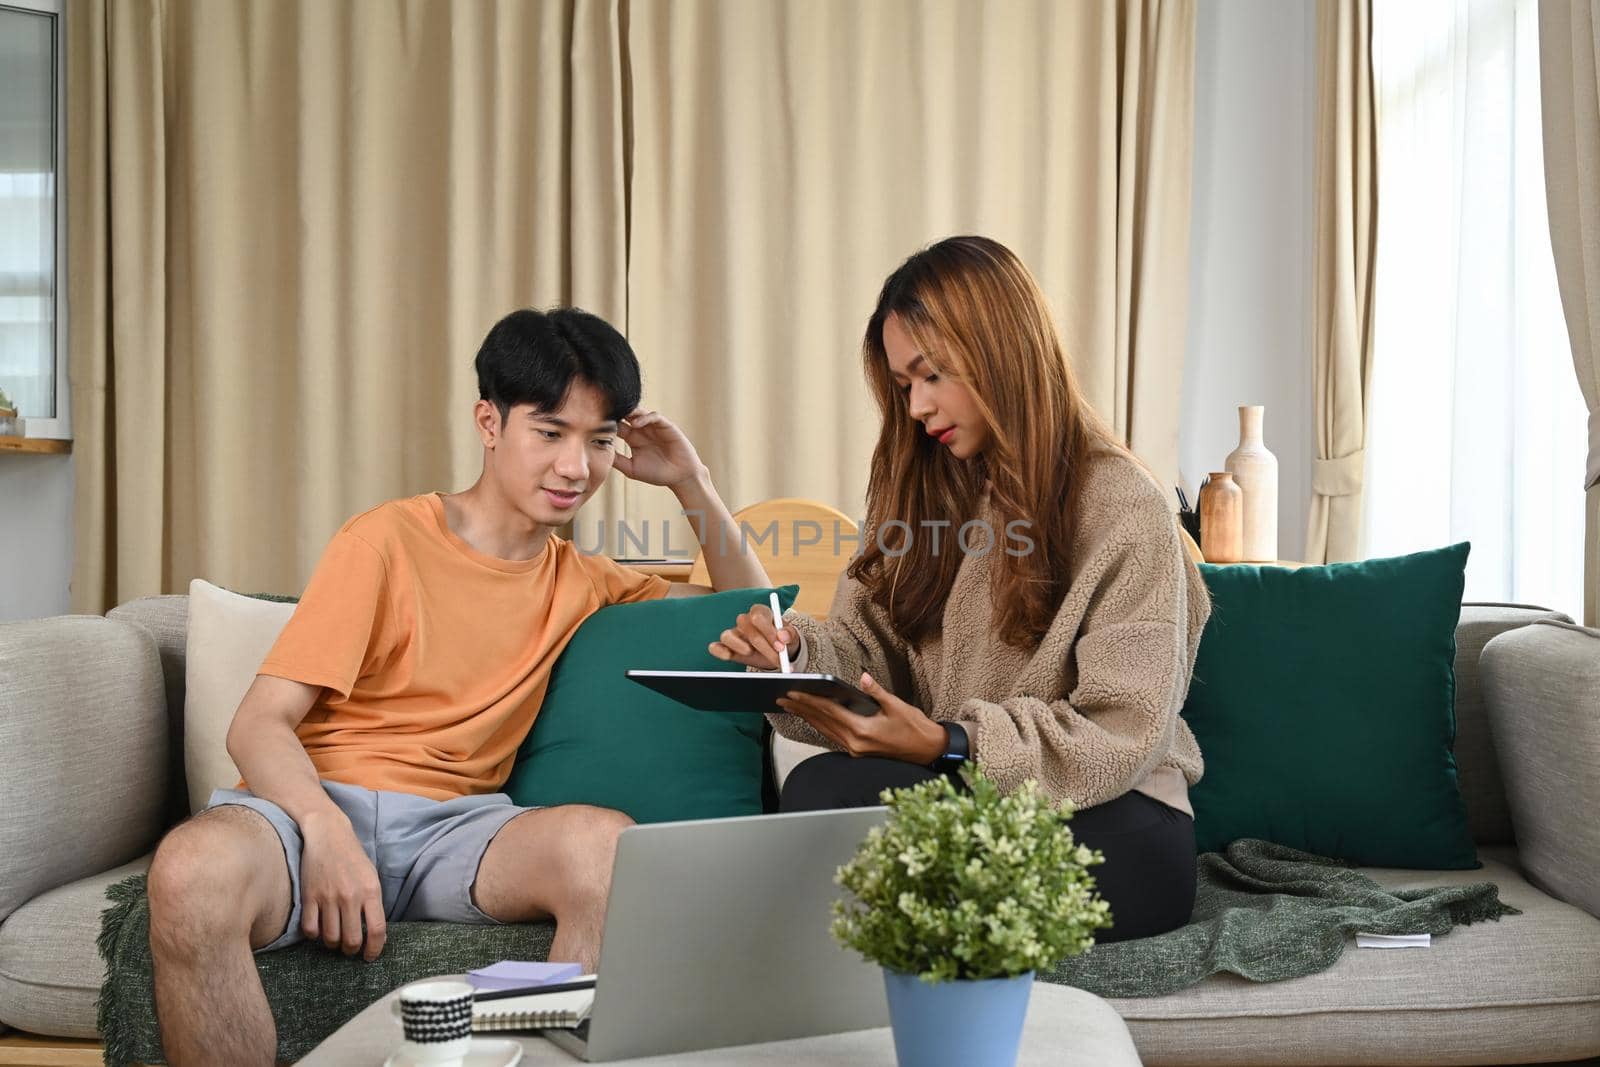 Young asian couple sitting together on couch and surfing internet with digital tablet.